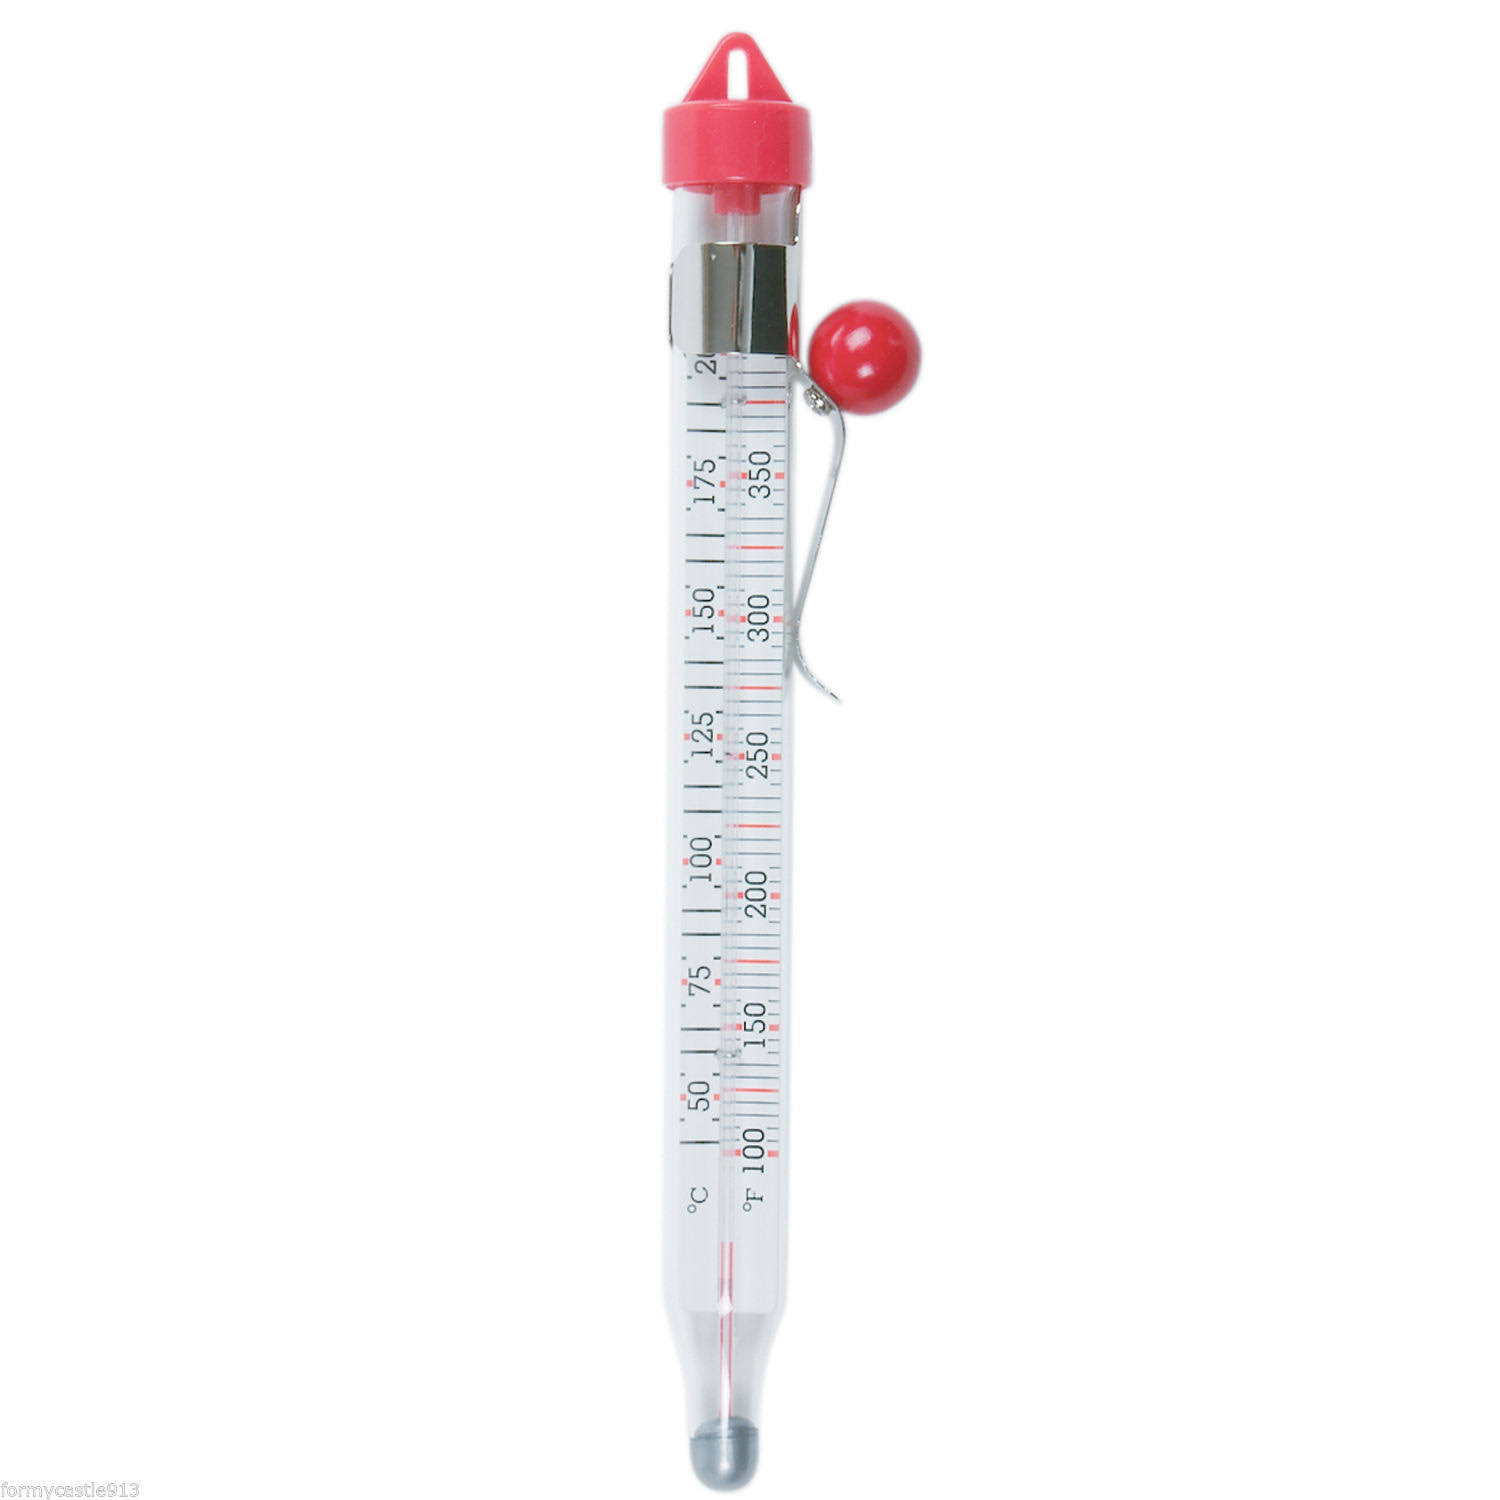 Taylor Classic Candy/Deep Fry Thermometer 5983 N